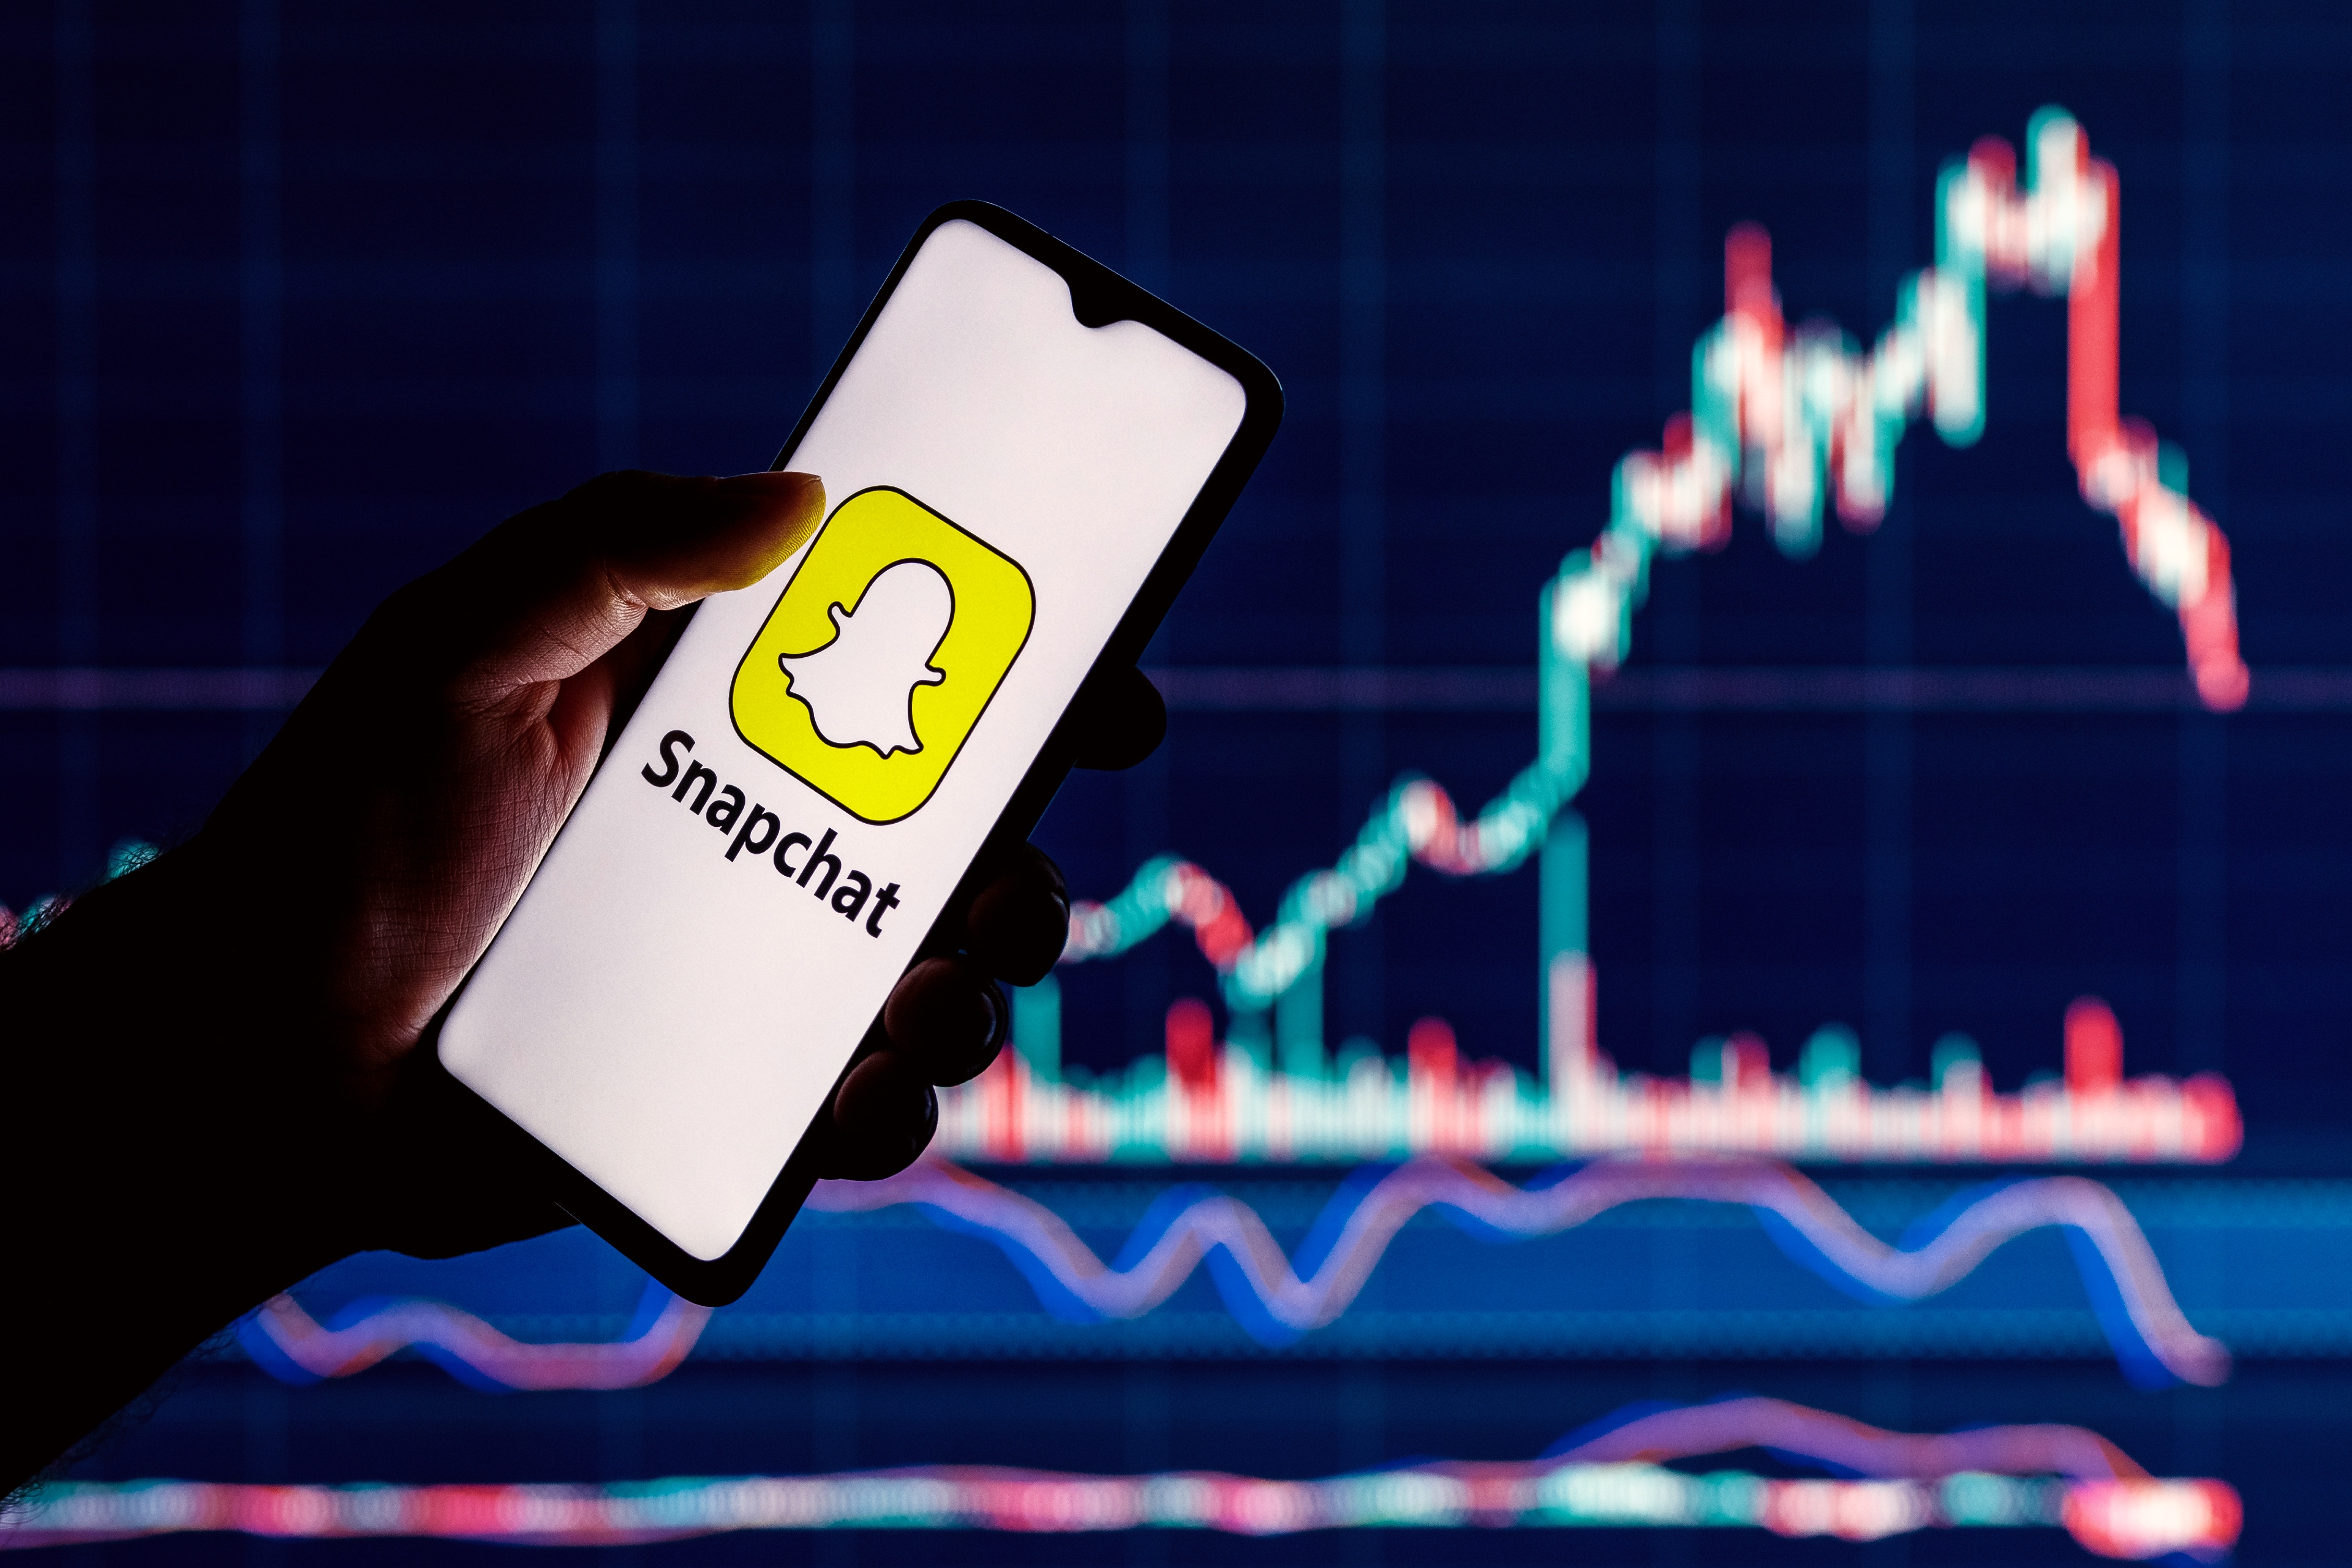 Snap stock outlook after gaining 22% this week